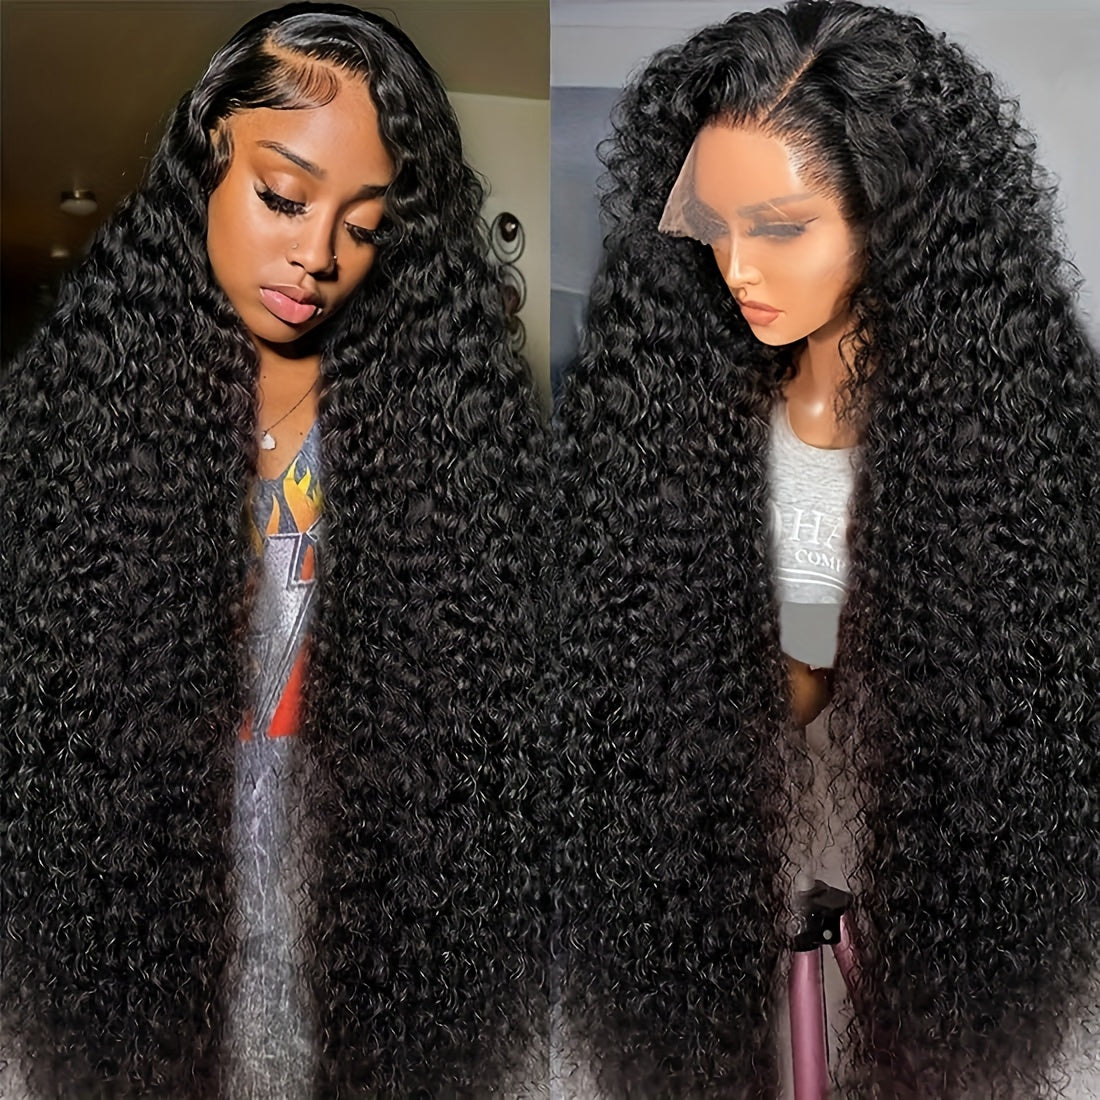 13x4 Lace Front Wigs Human Hair Water Wave Pre Plucked Brazilian Virgin Hair 180% Density 13x4 Deep Curly Lace Front Human Hair Wigs For Women Glueless Wigs With Baby Hair Natural Color 20-34 Inch